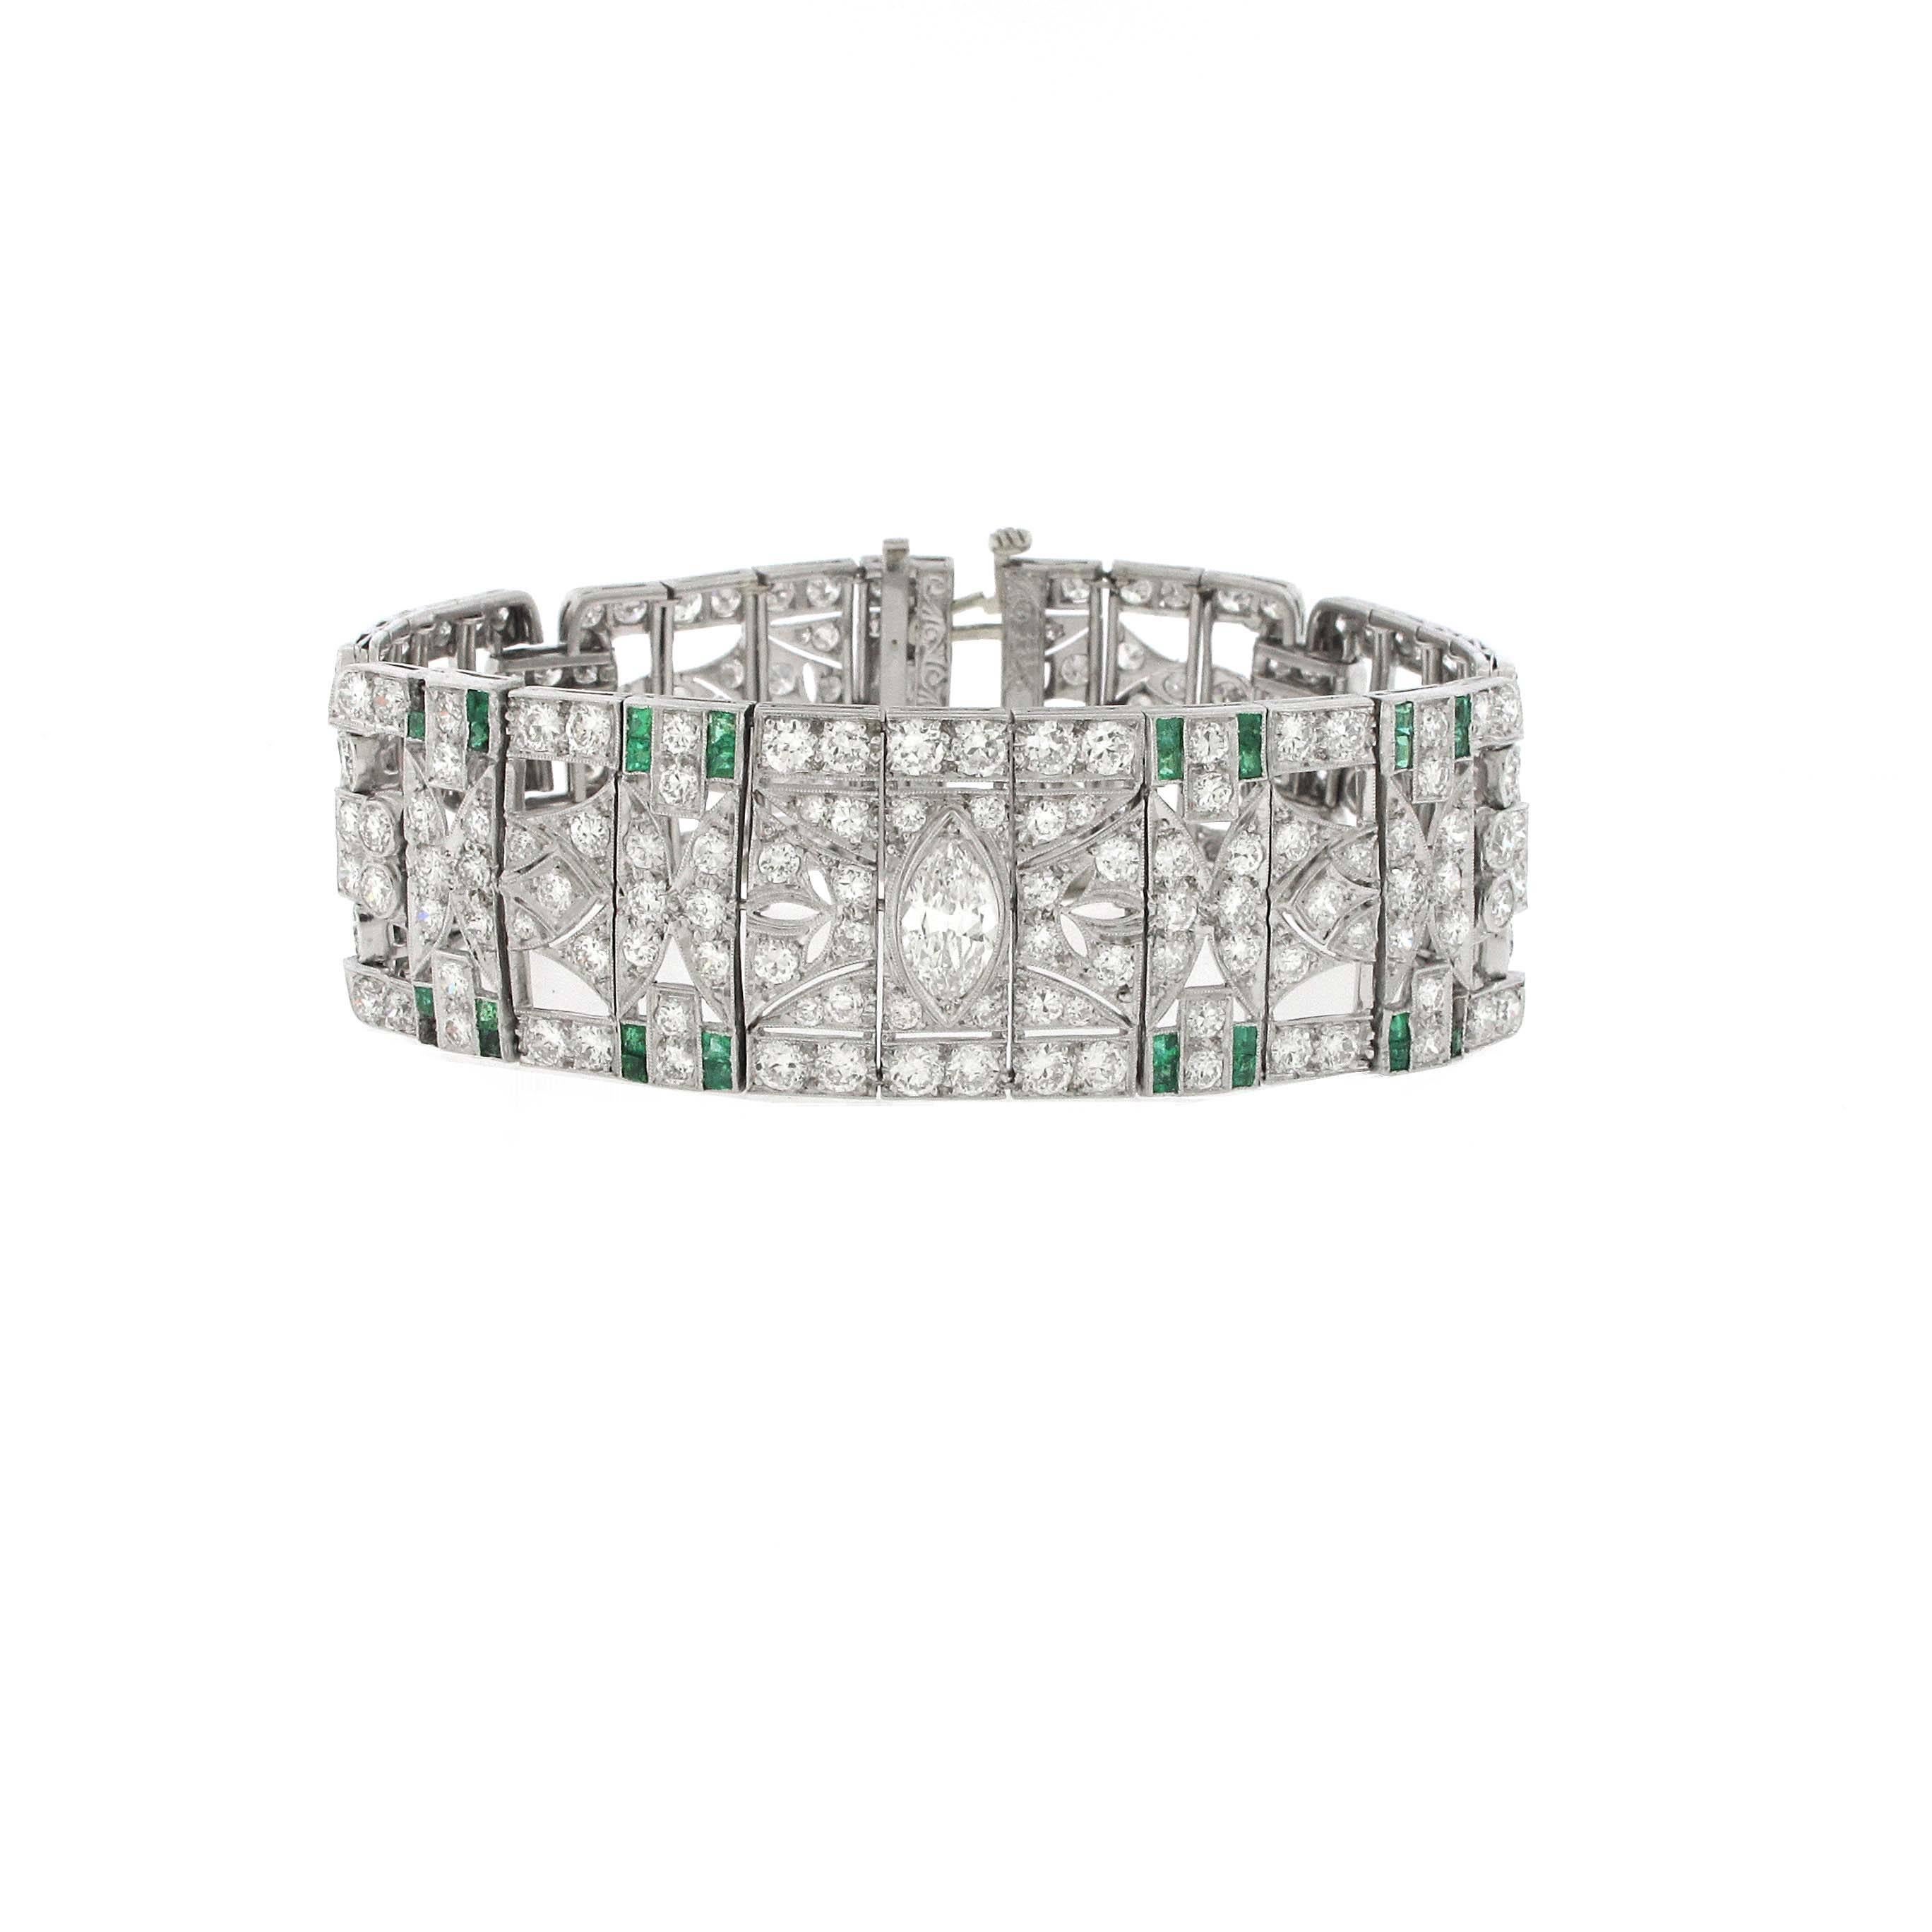 A true art deco diamond bracelet. These are the hardest bracelets to come across especially in the condition this one is in. The bracelet is in excellent condition however there are a couple of small emeralds missing. There are 3 large marquise